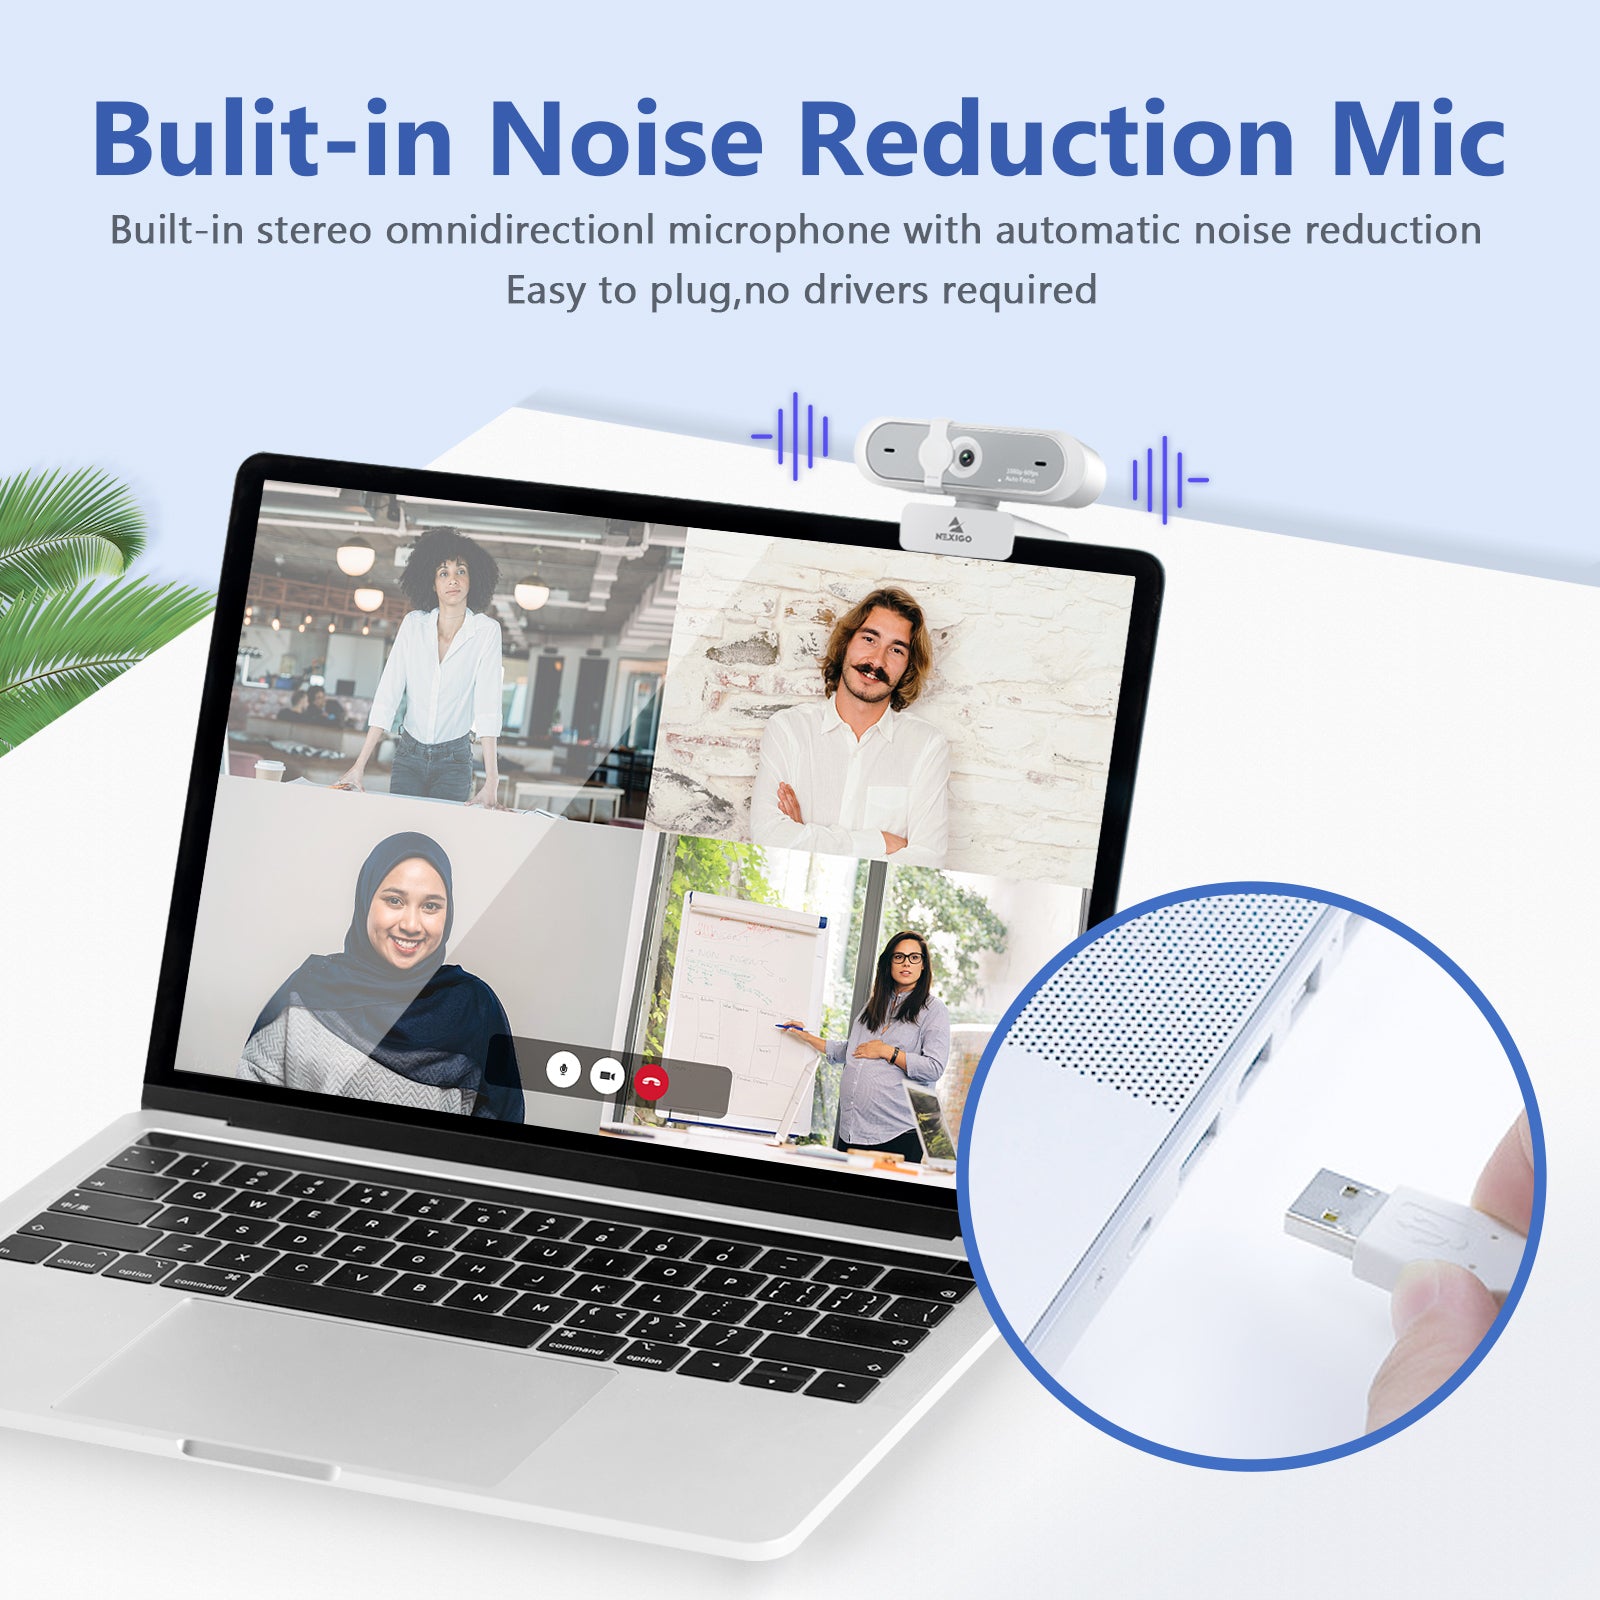 Dual-mic webcam with auto noise reduction, plug-and-play, no drivers needed.